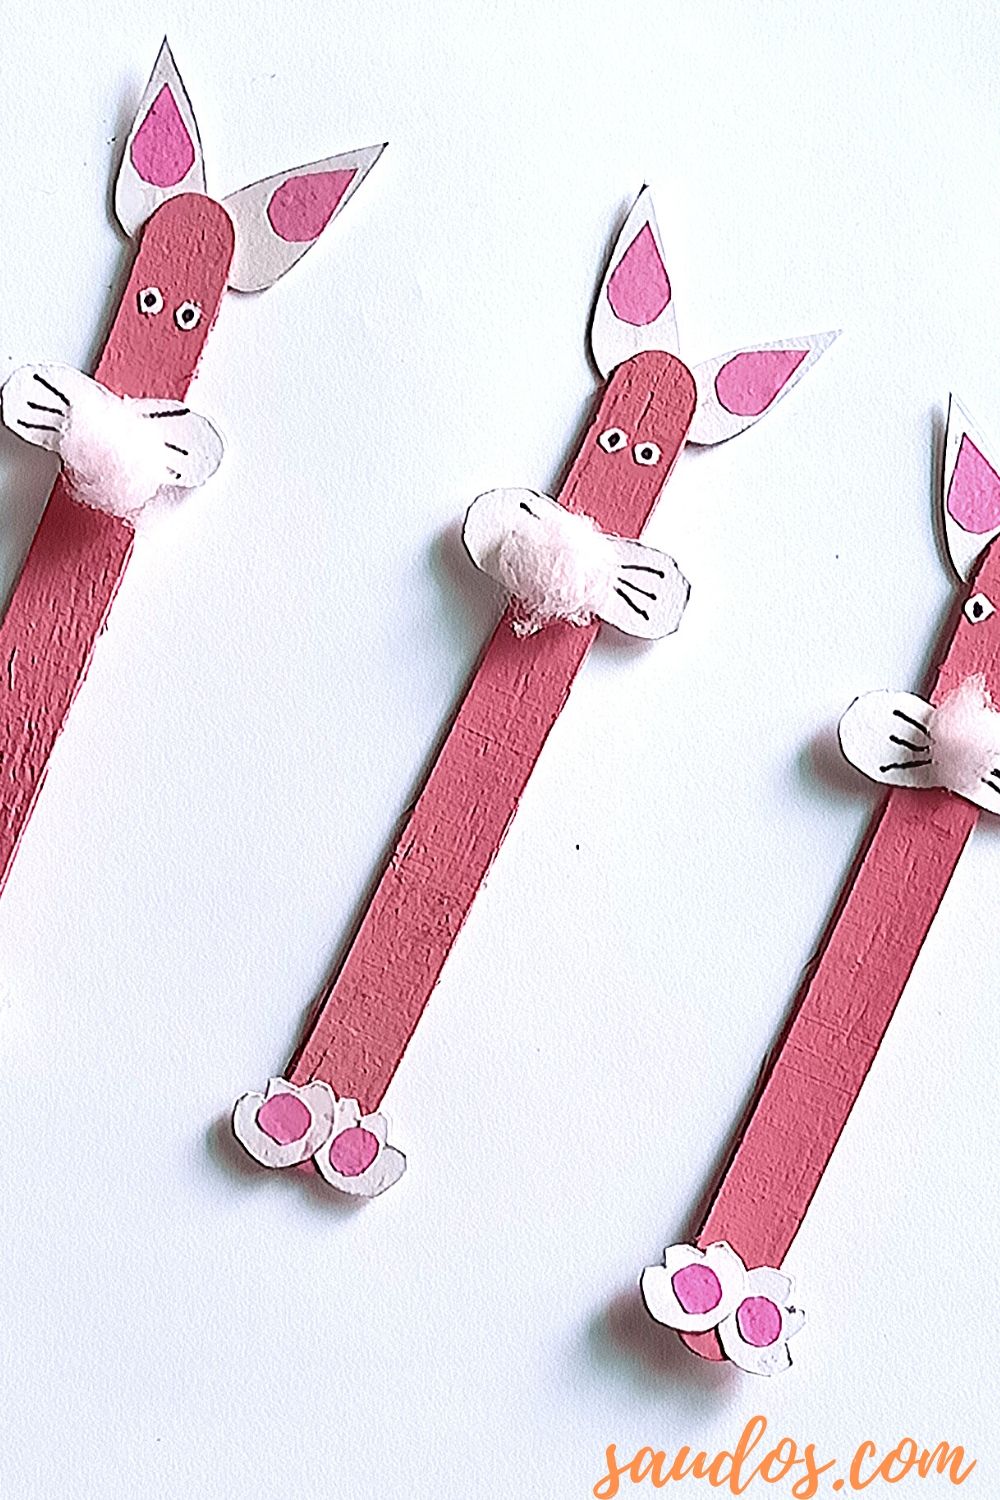 Popsicle Stick Bunny pieces in honor of the upcoming Easter holiday!